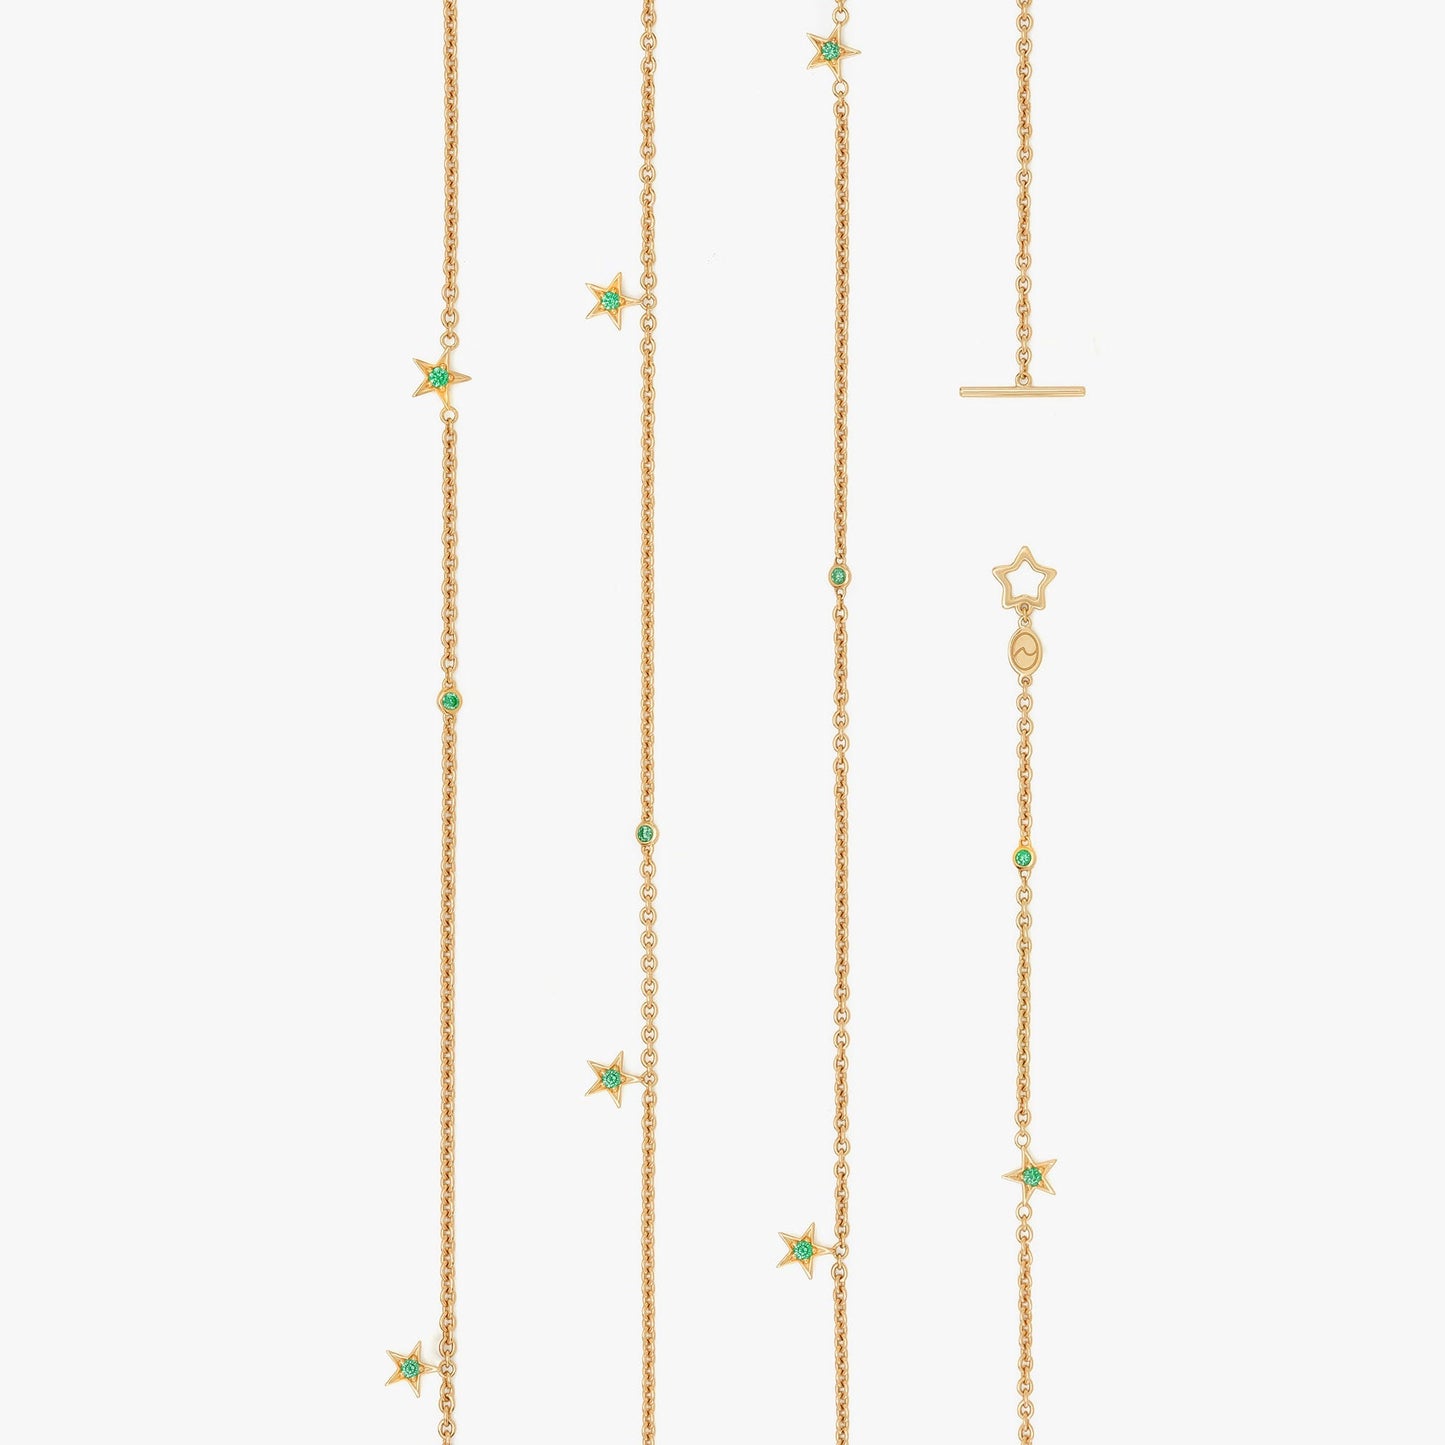 Guiding Star 18ct Yellow Gold & Emerald Necklace, 70cm